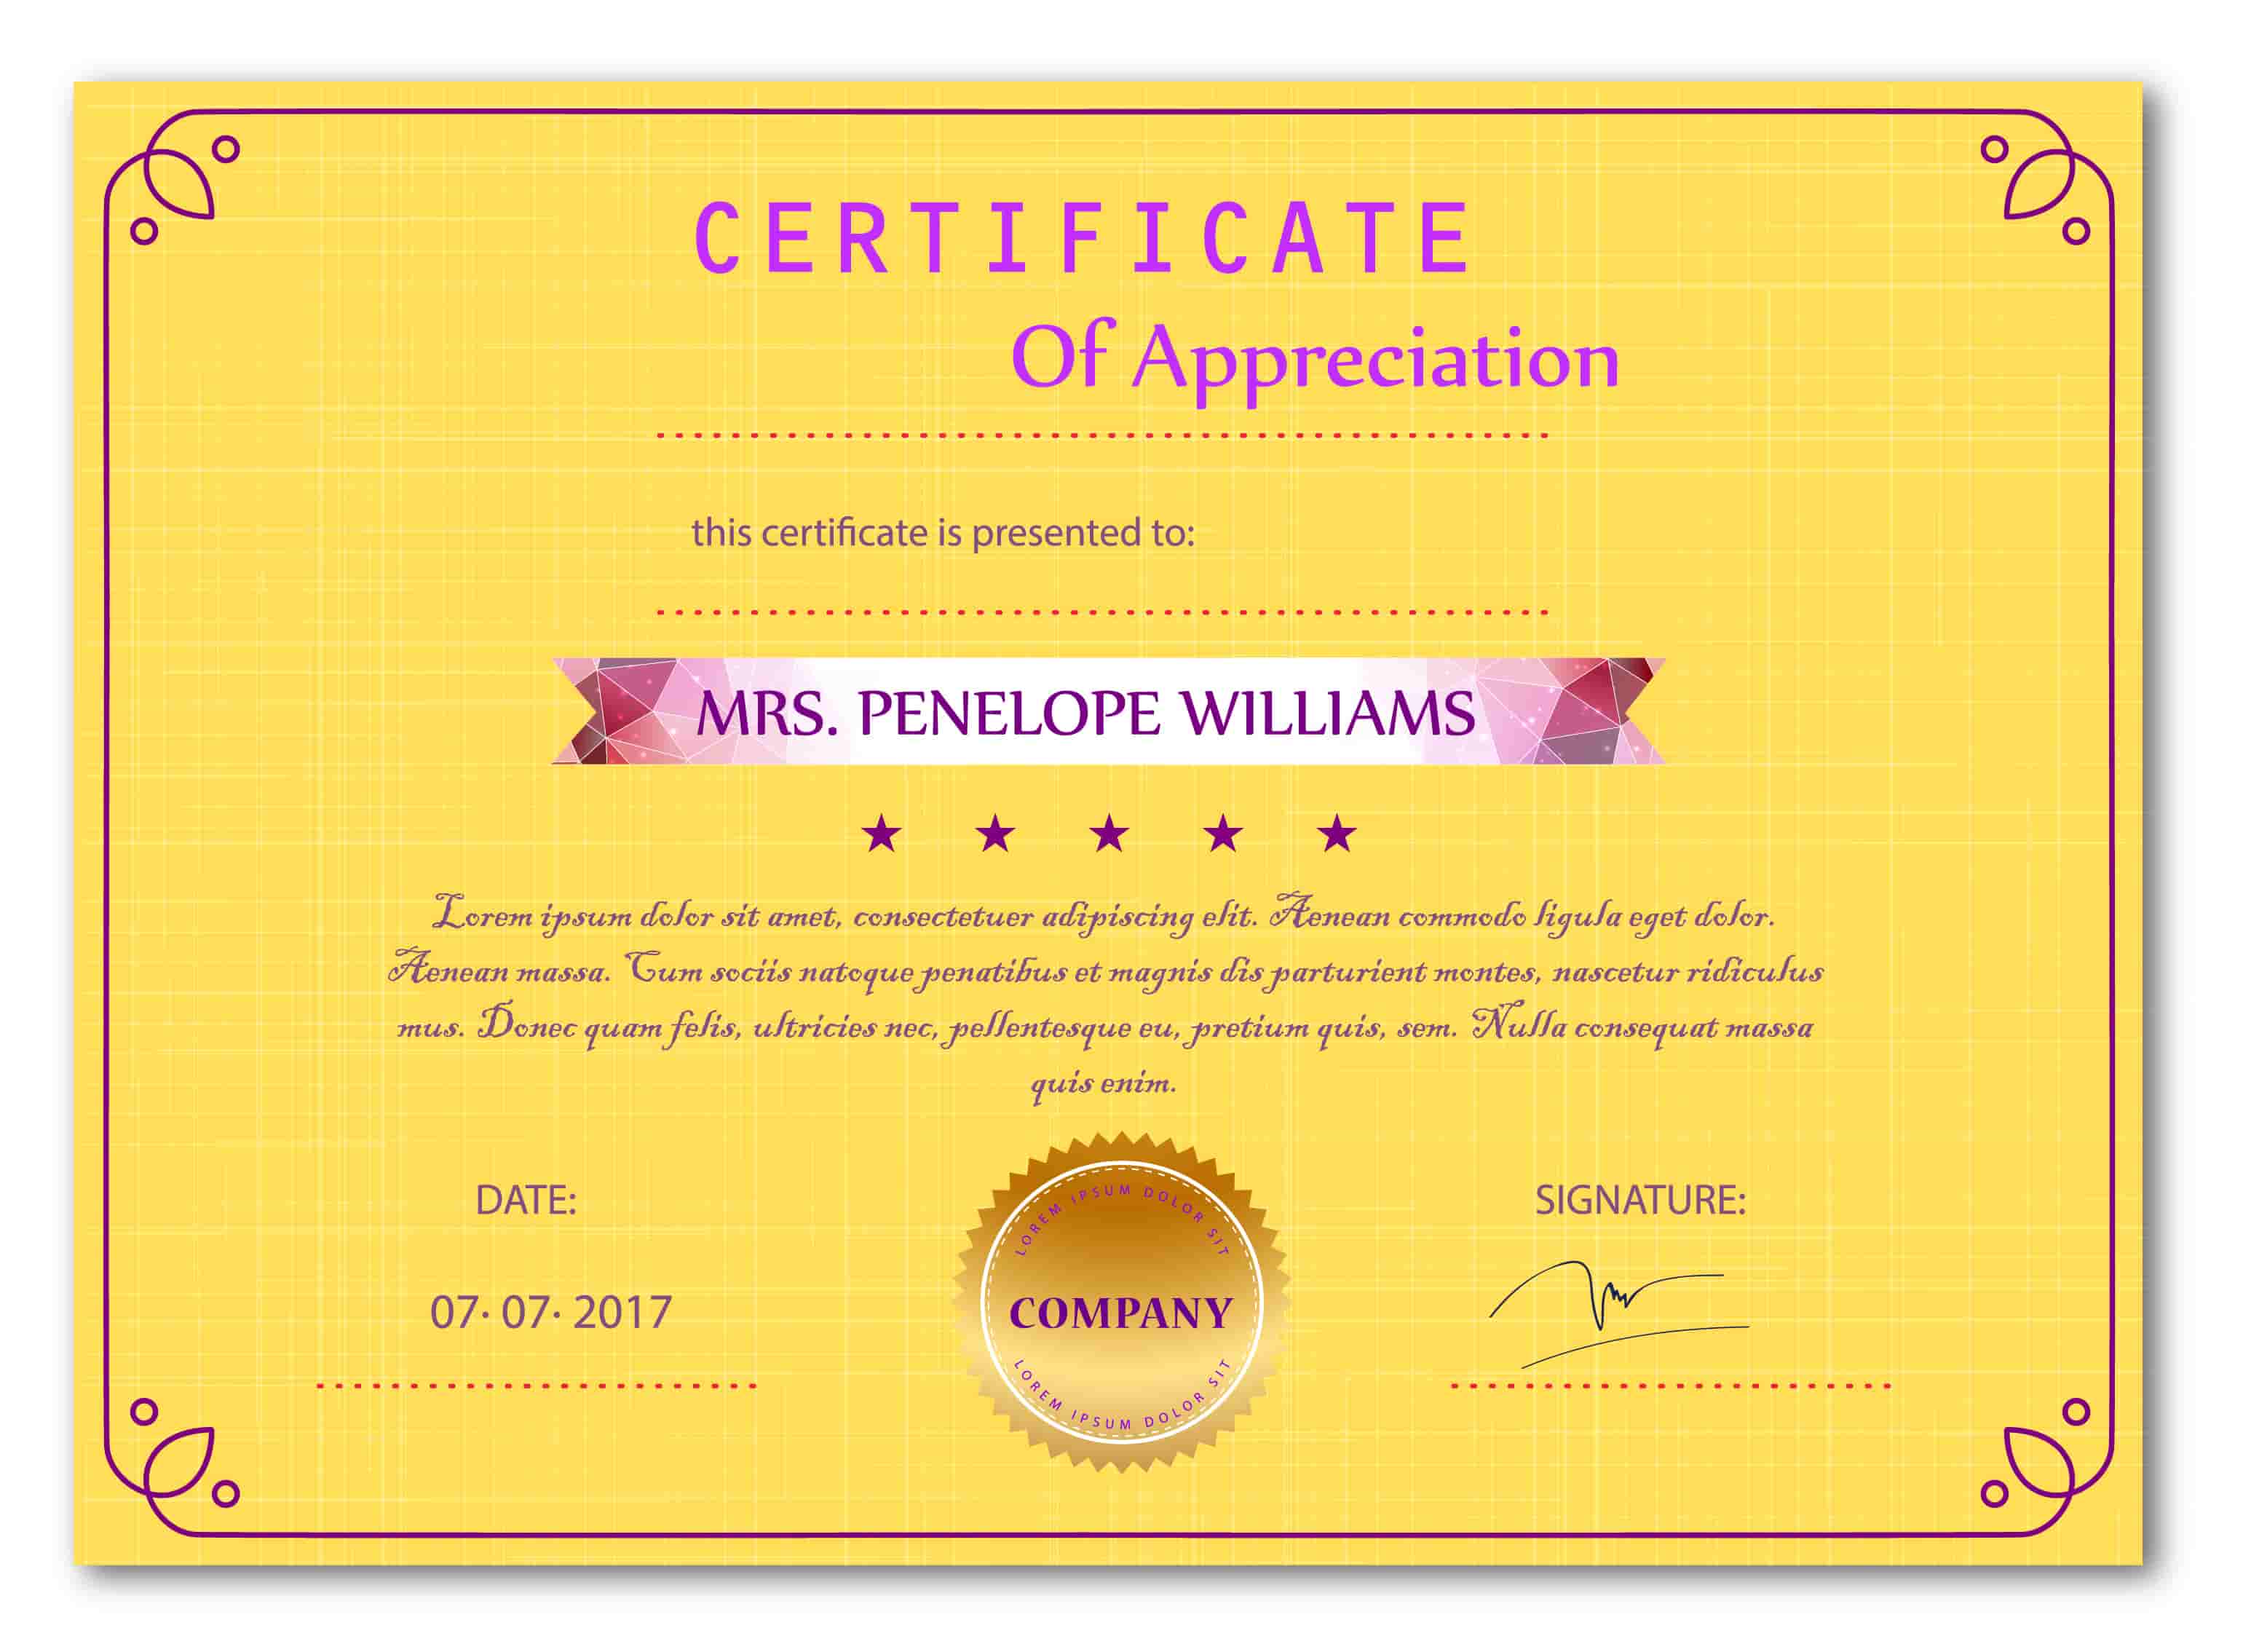 Appreciation Certificate Vector Illustration With Yellow Background Vector File